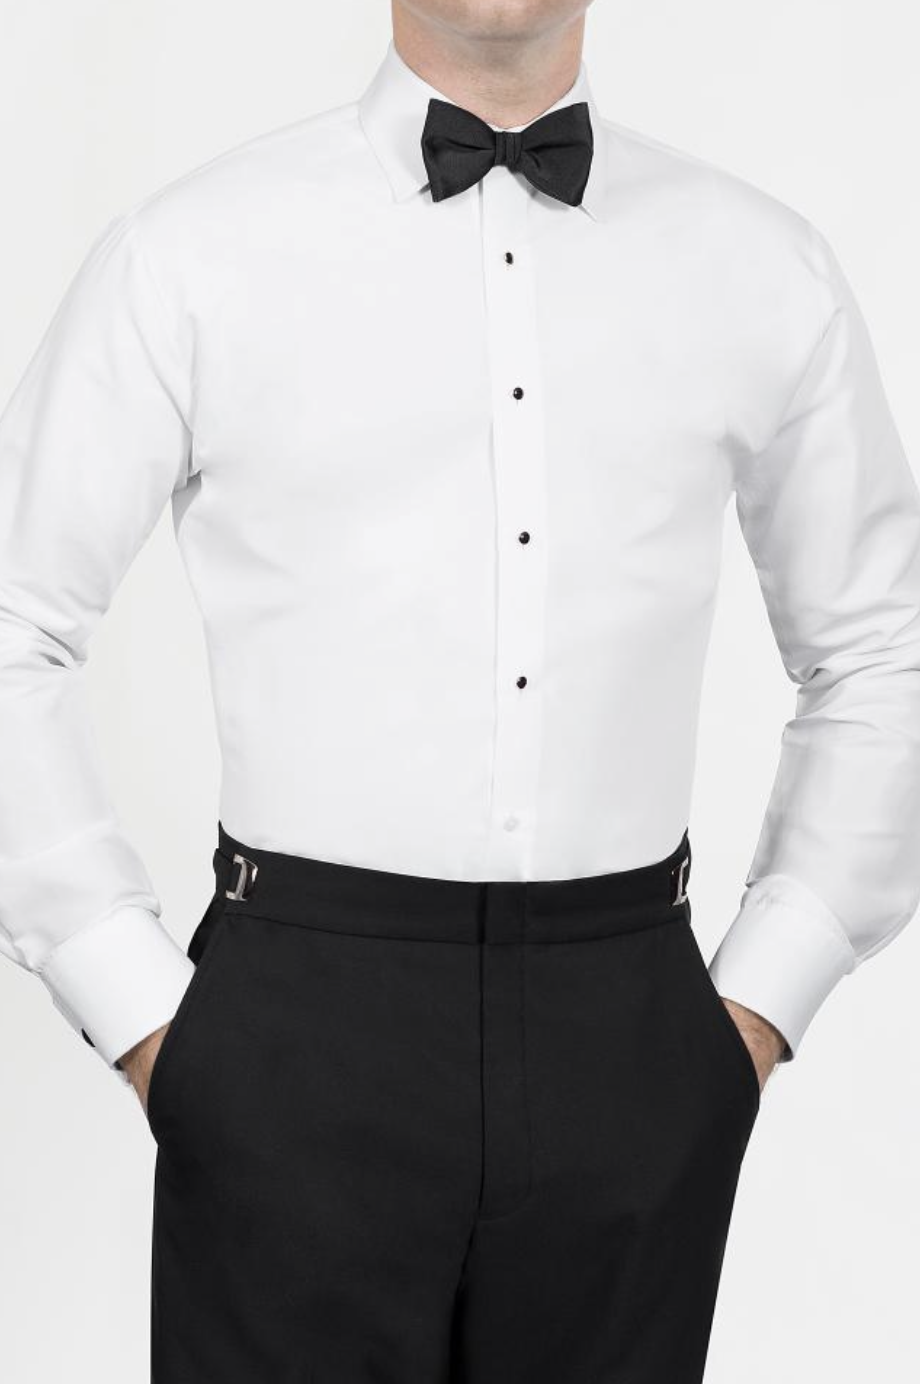 Microfiber shirt shown with black bow tie and black buttons